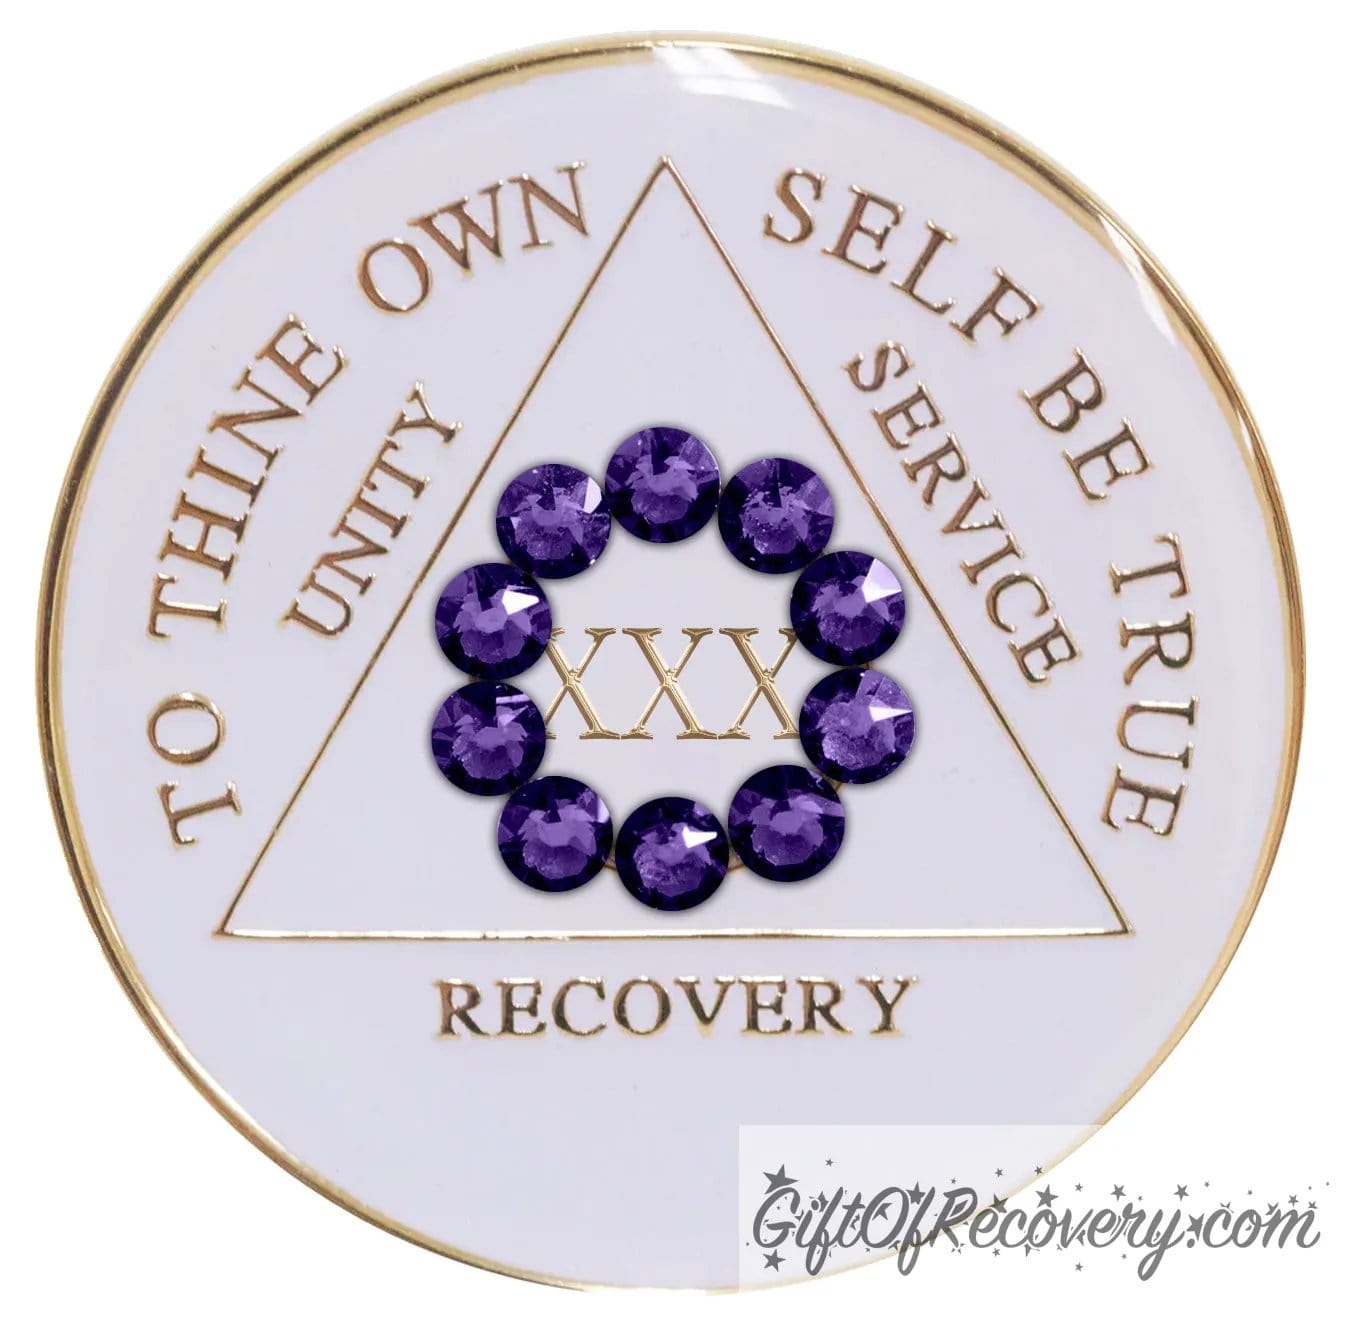 30 year AA medallion in pearl white with ten genuine purple velvet crystal in a circle representing our common welfare and personal recovery, to thine own self be true and other AA moto embossed with 14k gold-plated brass, the recovery medallion is sealed with resin for a scratch free shiny finish.